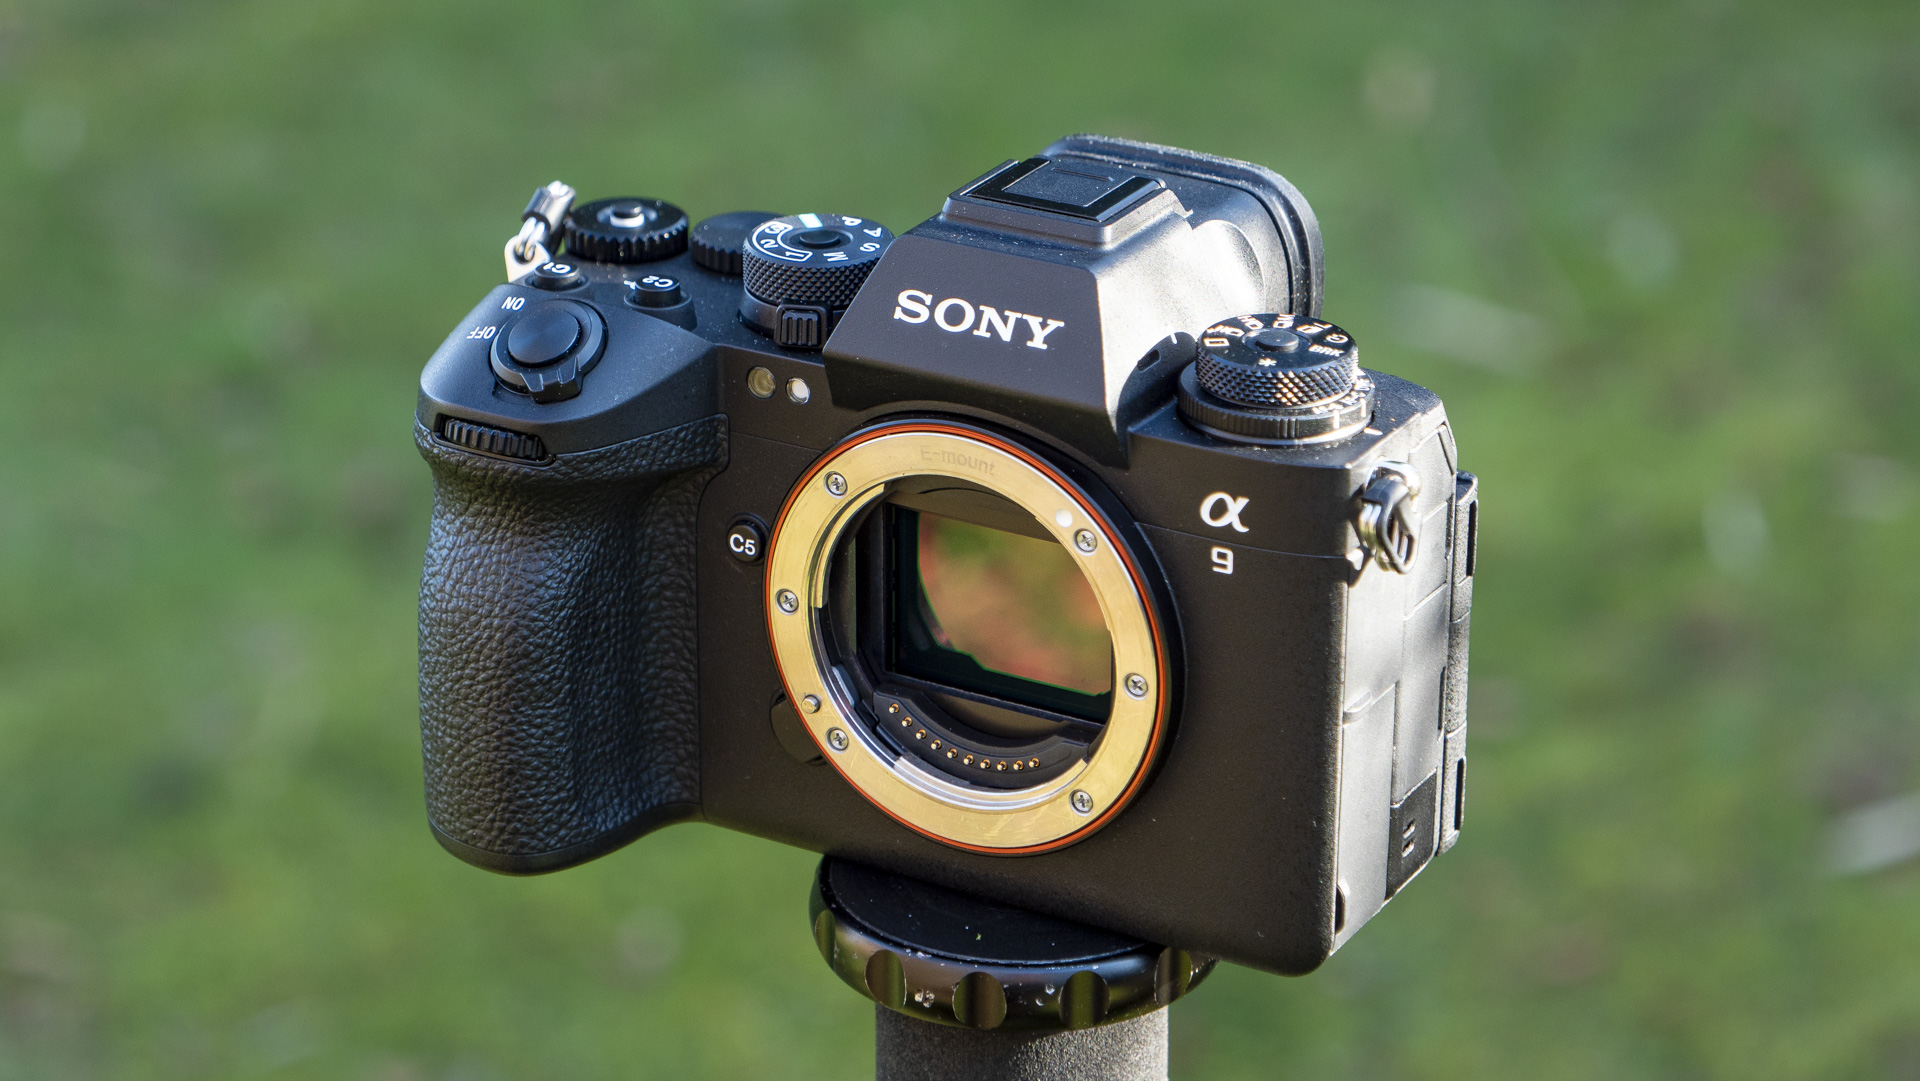 Sony A9 III camera outside with background foliage, no lens attached